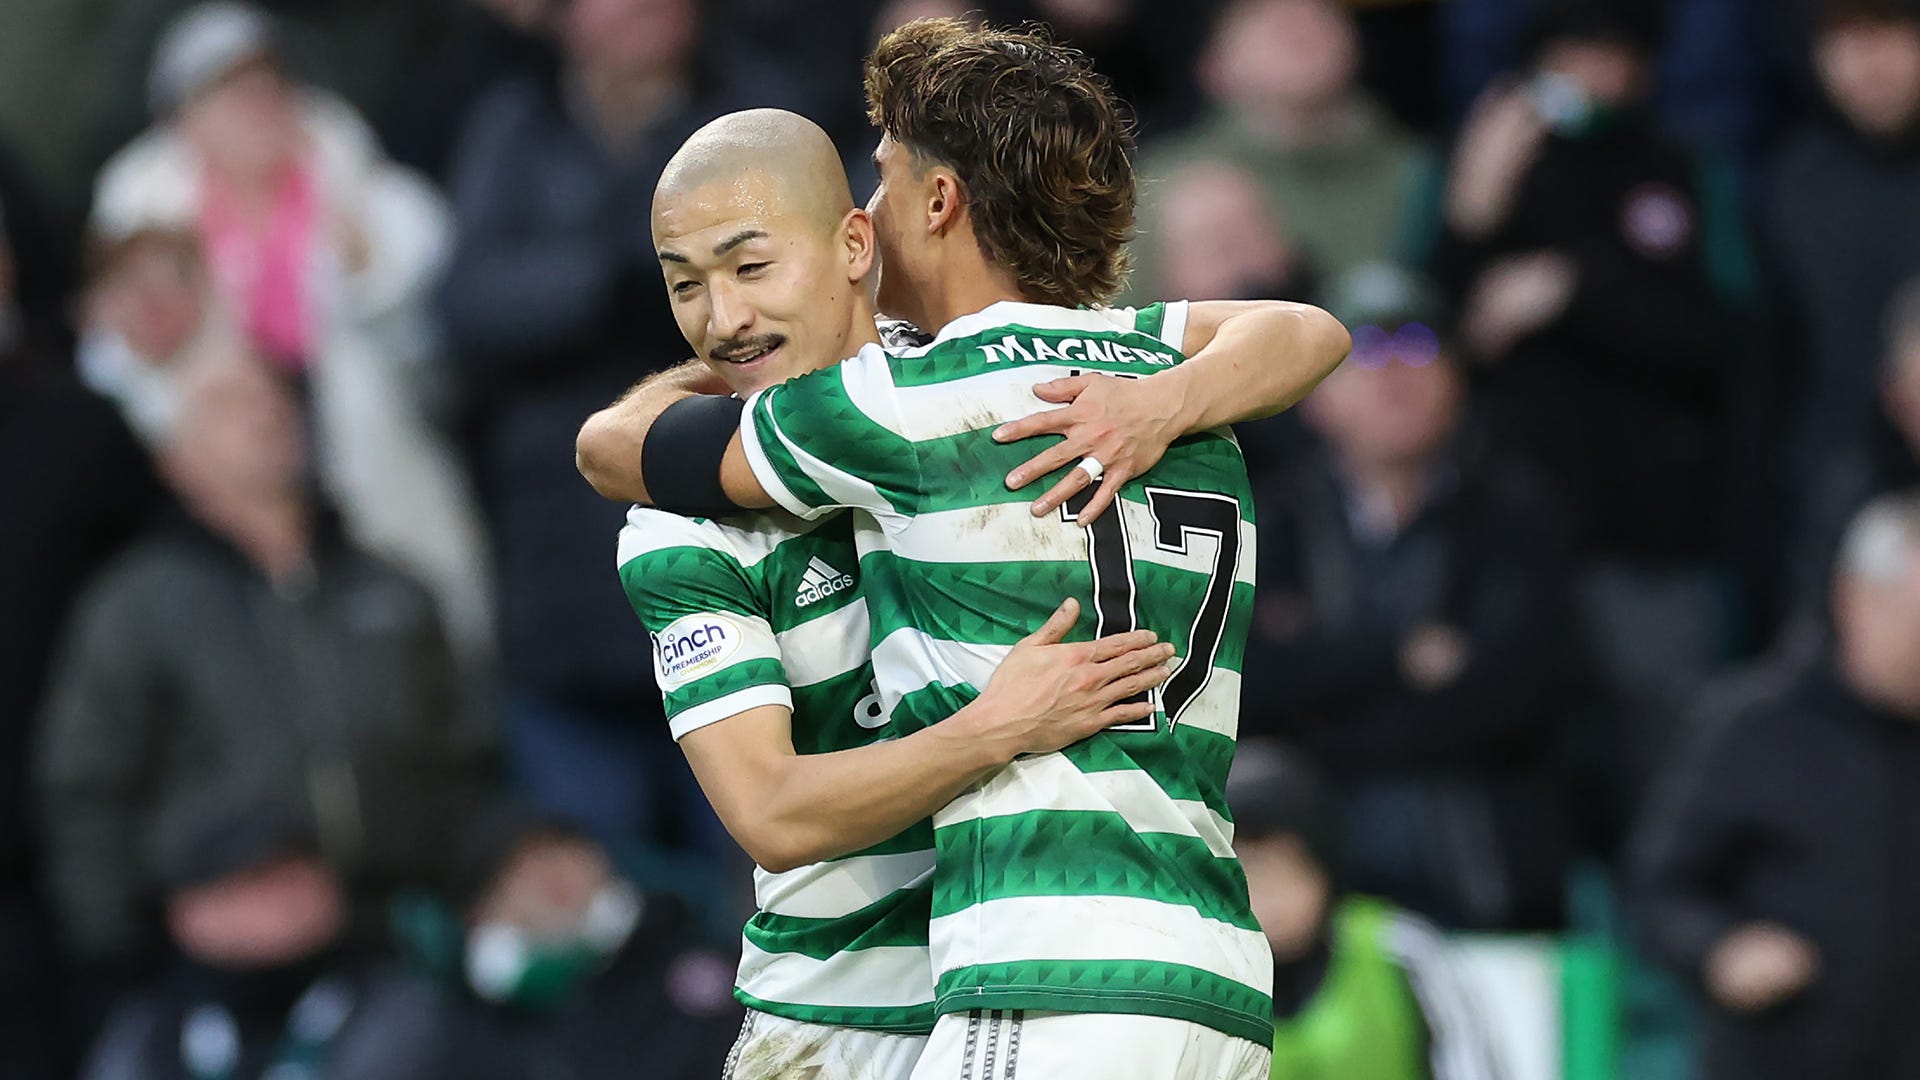 Celtic vs Kilmarnock Live stream, TV channel, kick-off time and where to watch Goal UK